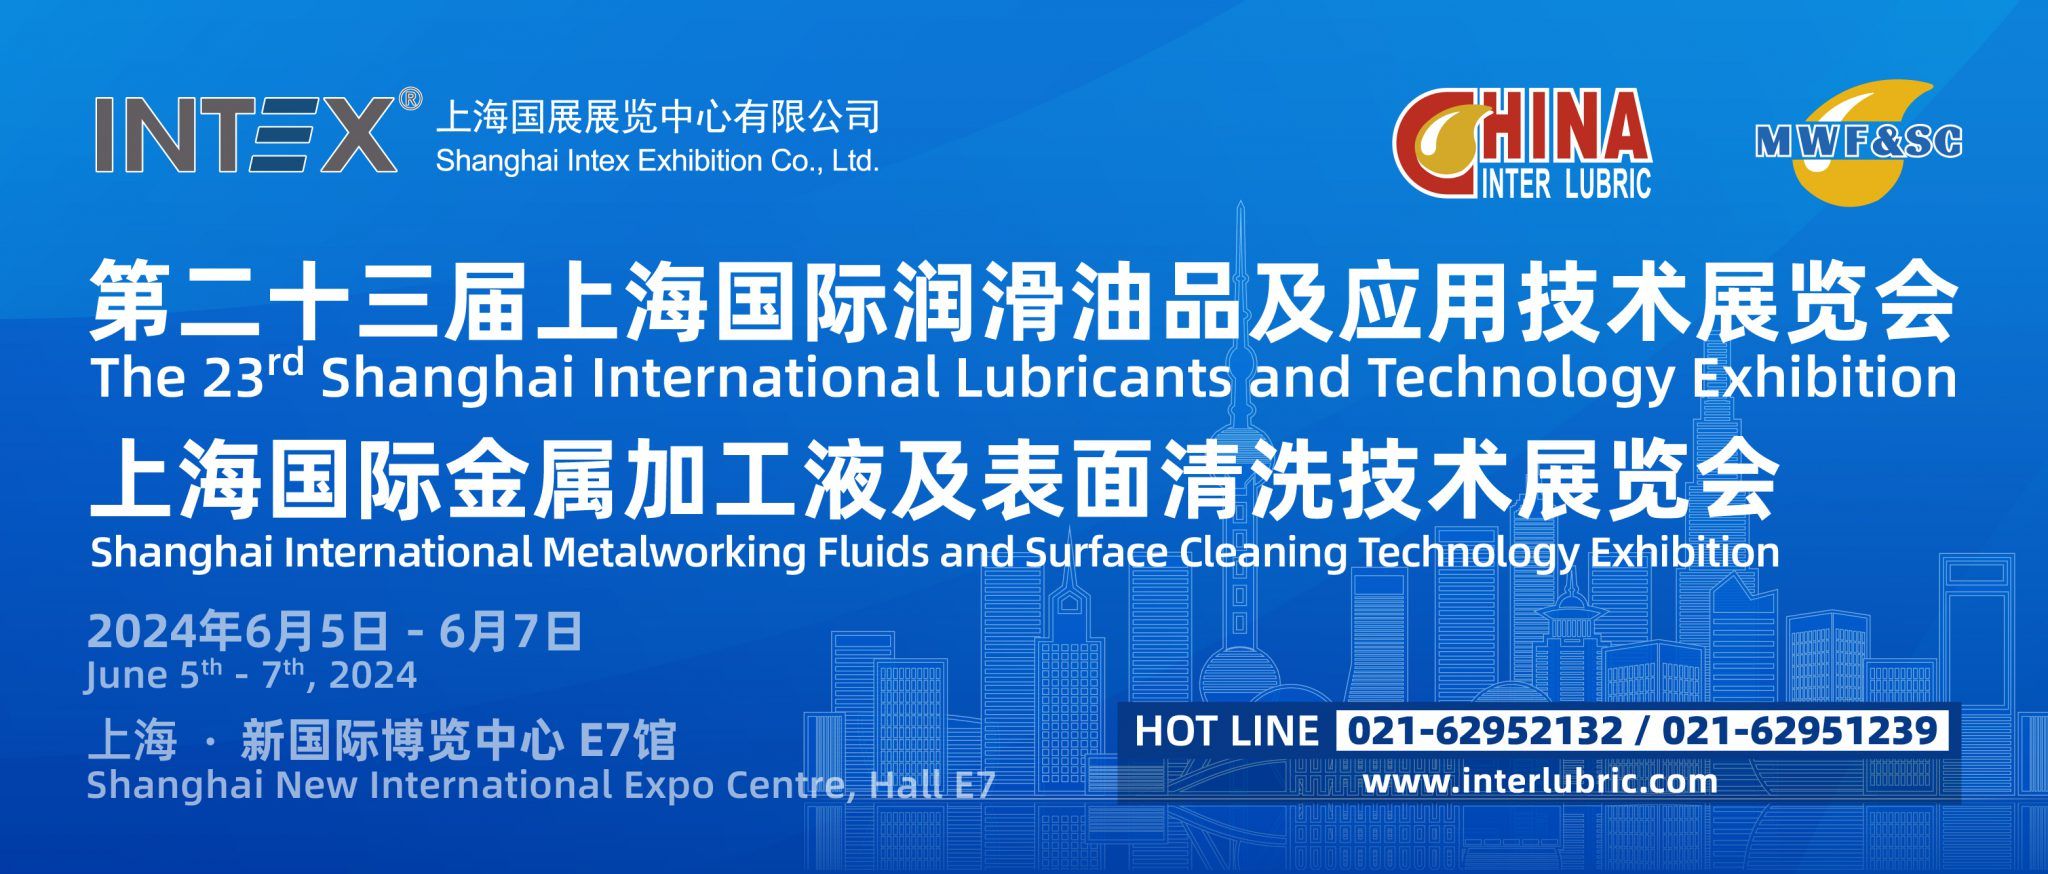 Join Us at the 23rd Shanghai International Lubricants and Technology Exhibition 2024